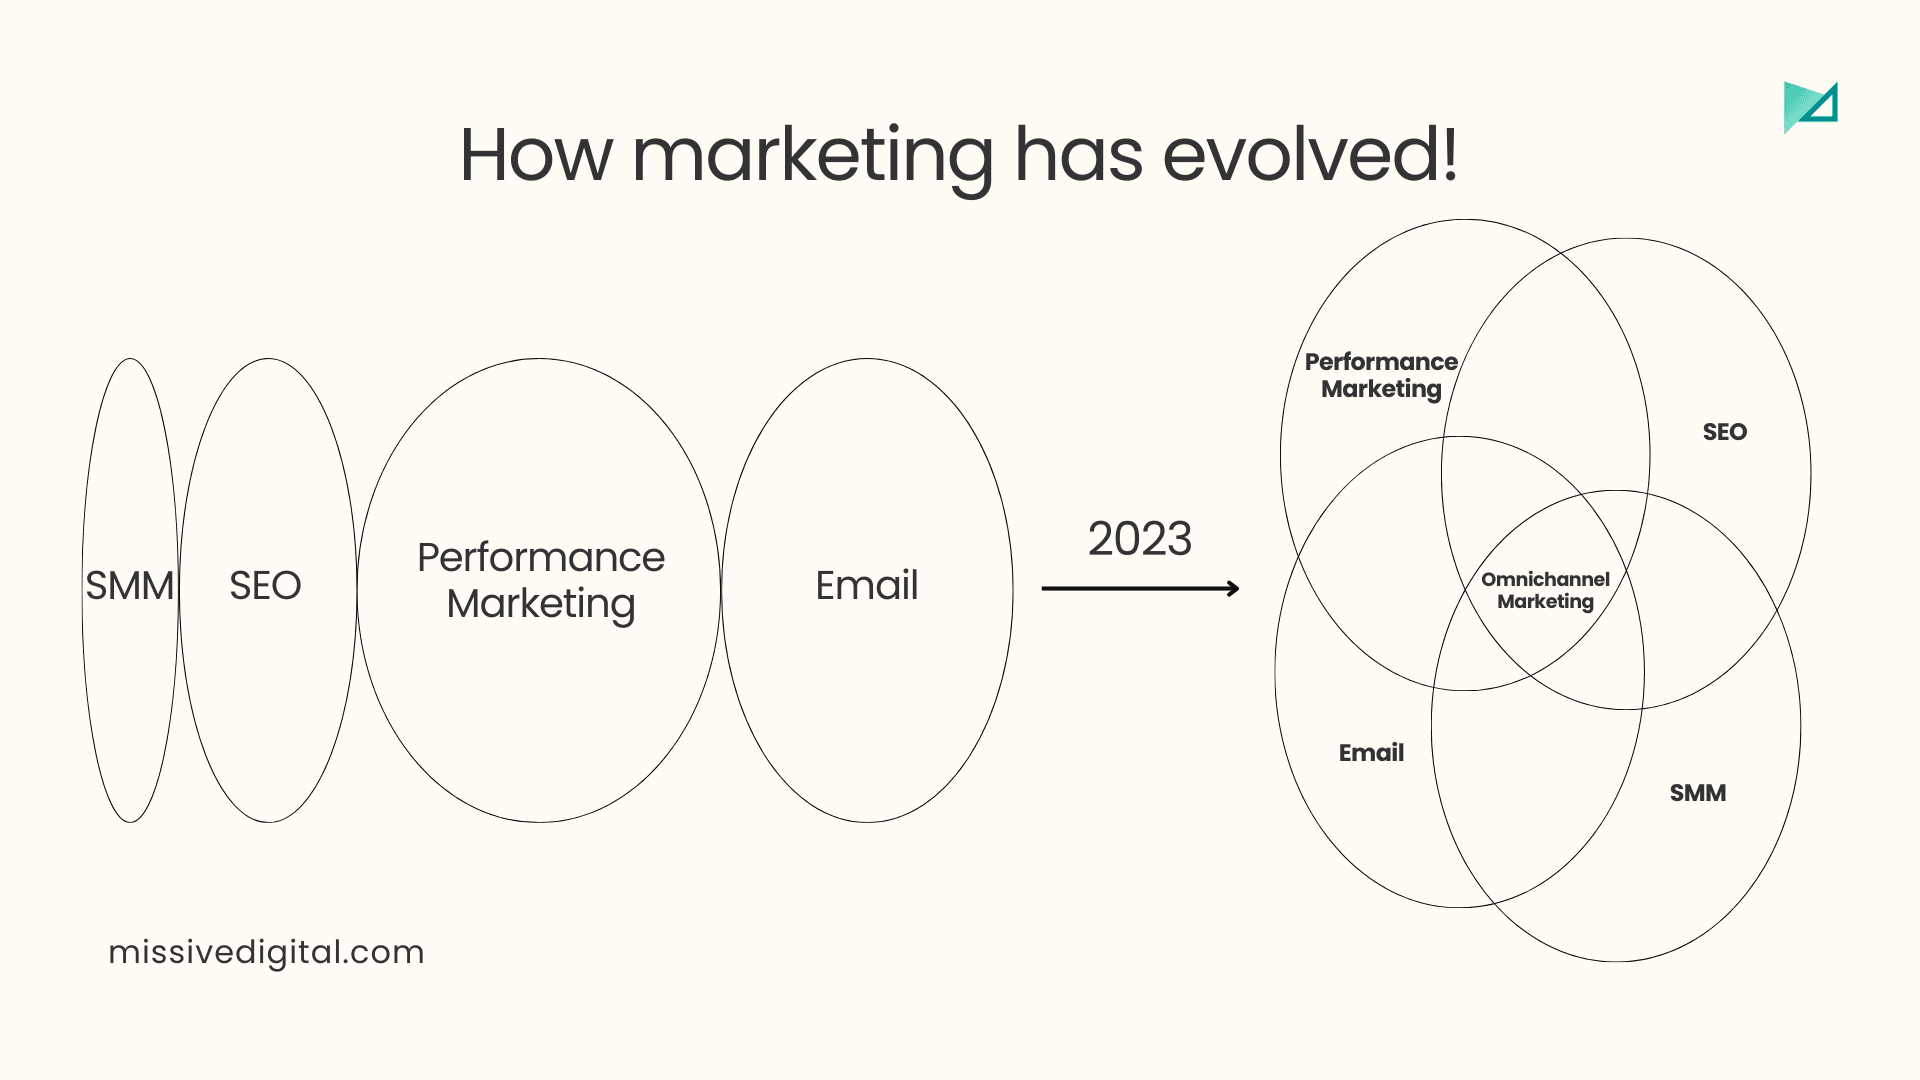 You should know how marketing has evolved from independent channel-specific marketing to omnichannel marketing to avoid content strategy failure